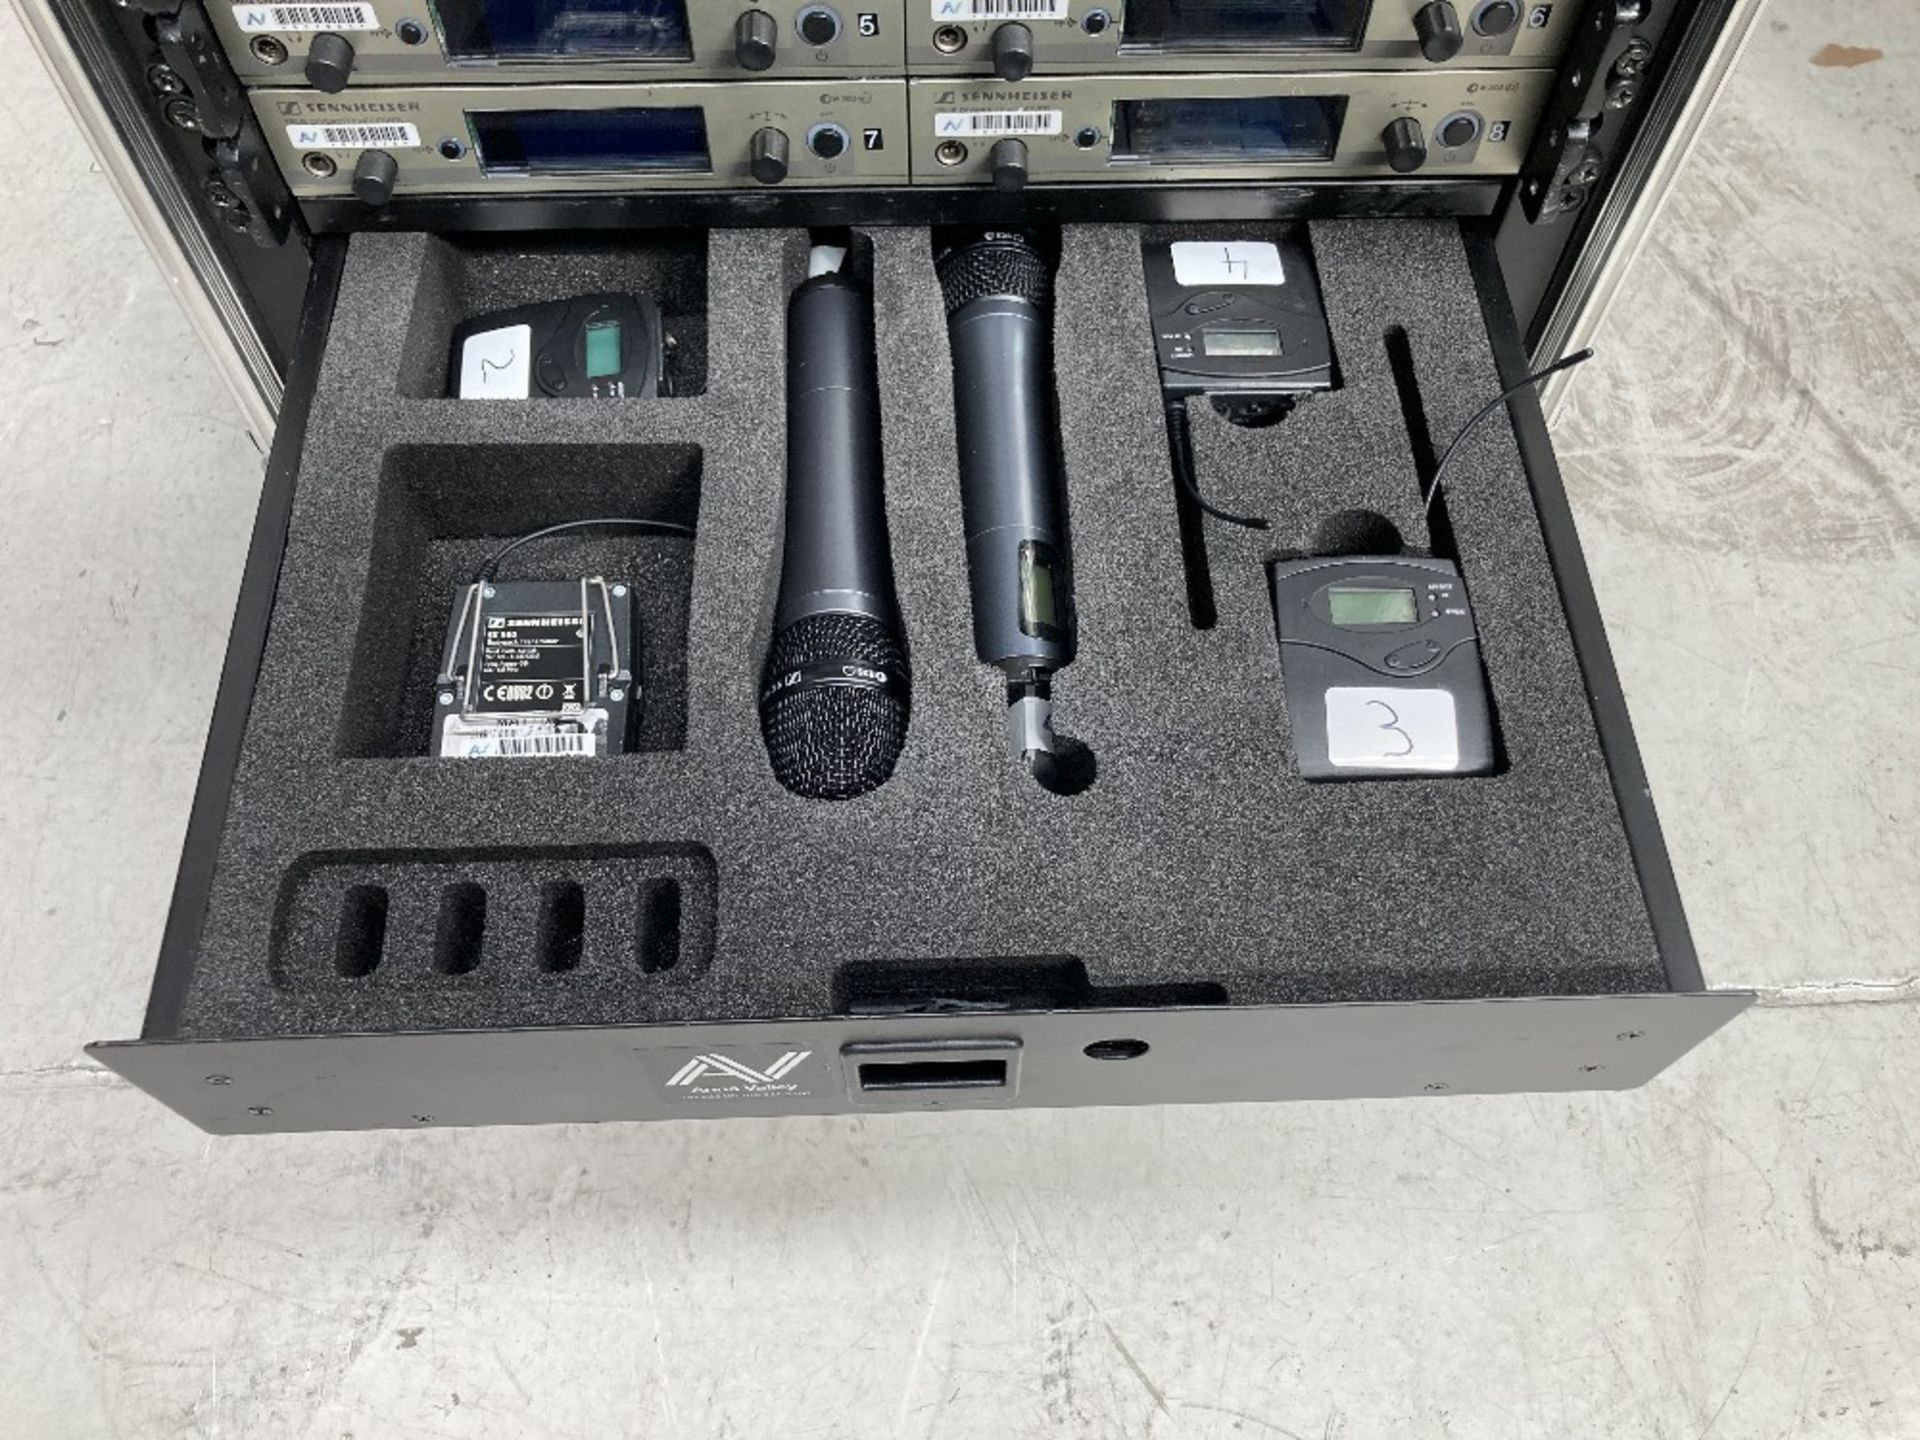 Yamaha TF1 Digital Mixing Console Full Rack with Microphones & Heavy Duty Mobile Flight Case Rack - Image 14 of 18